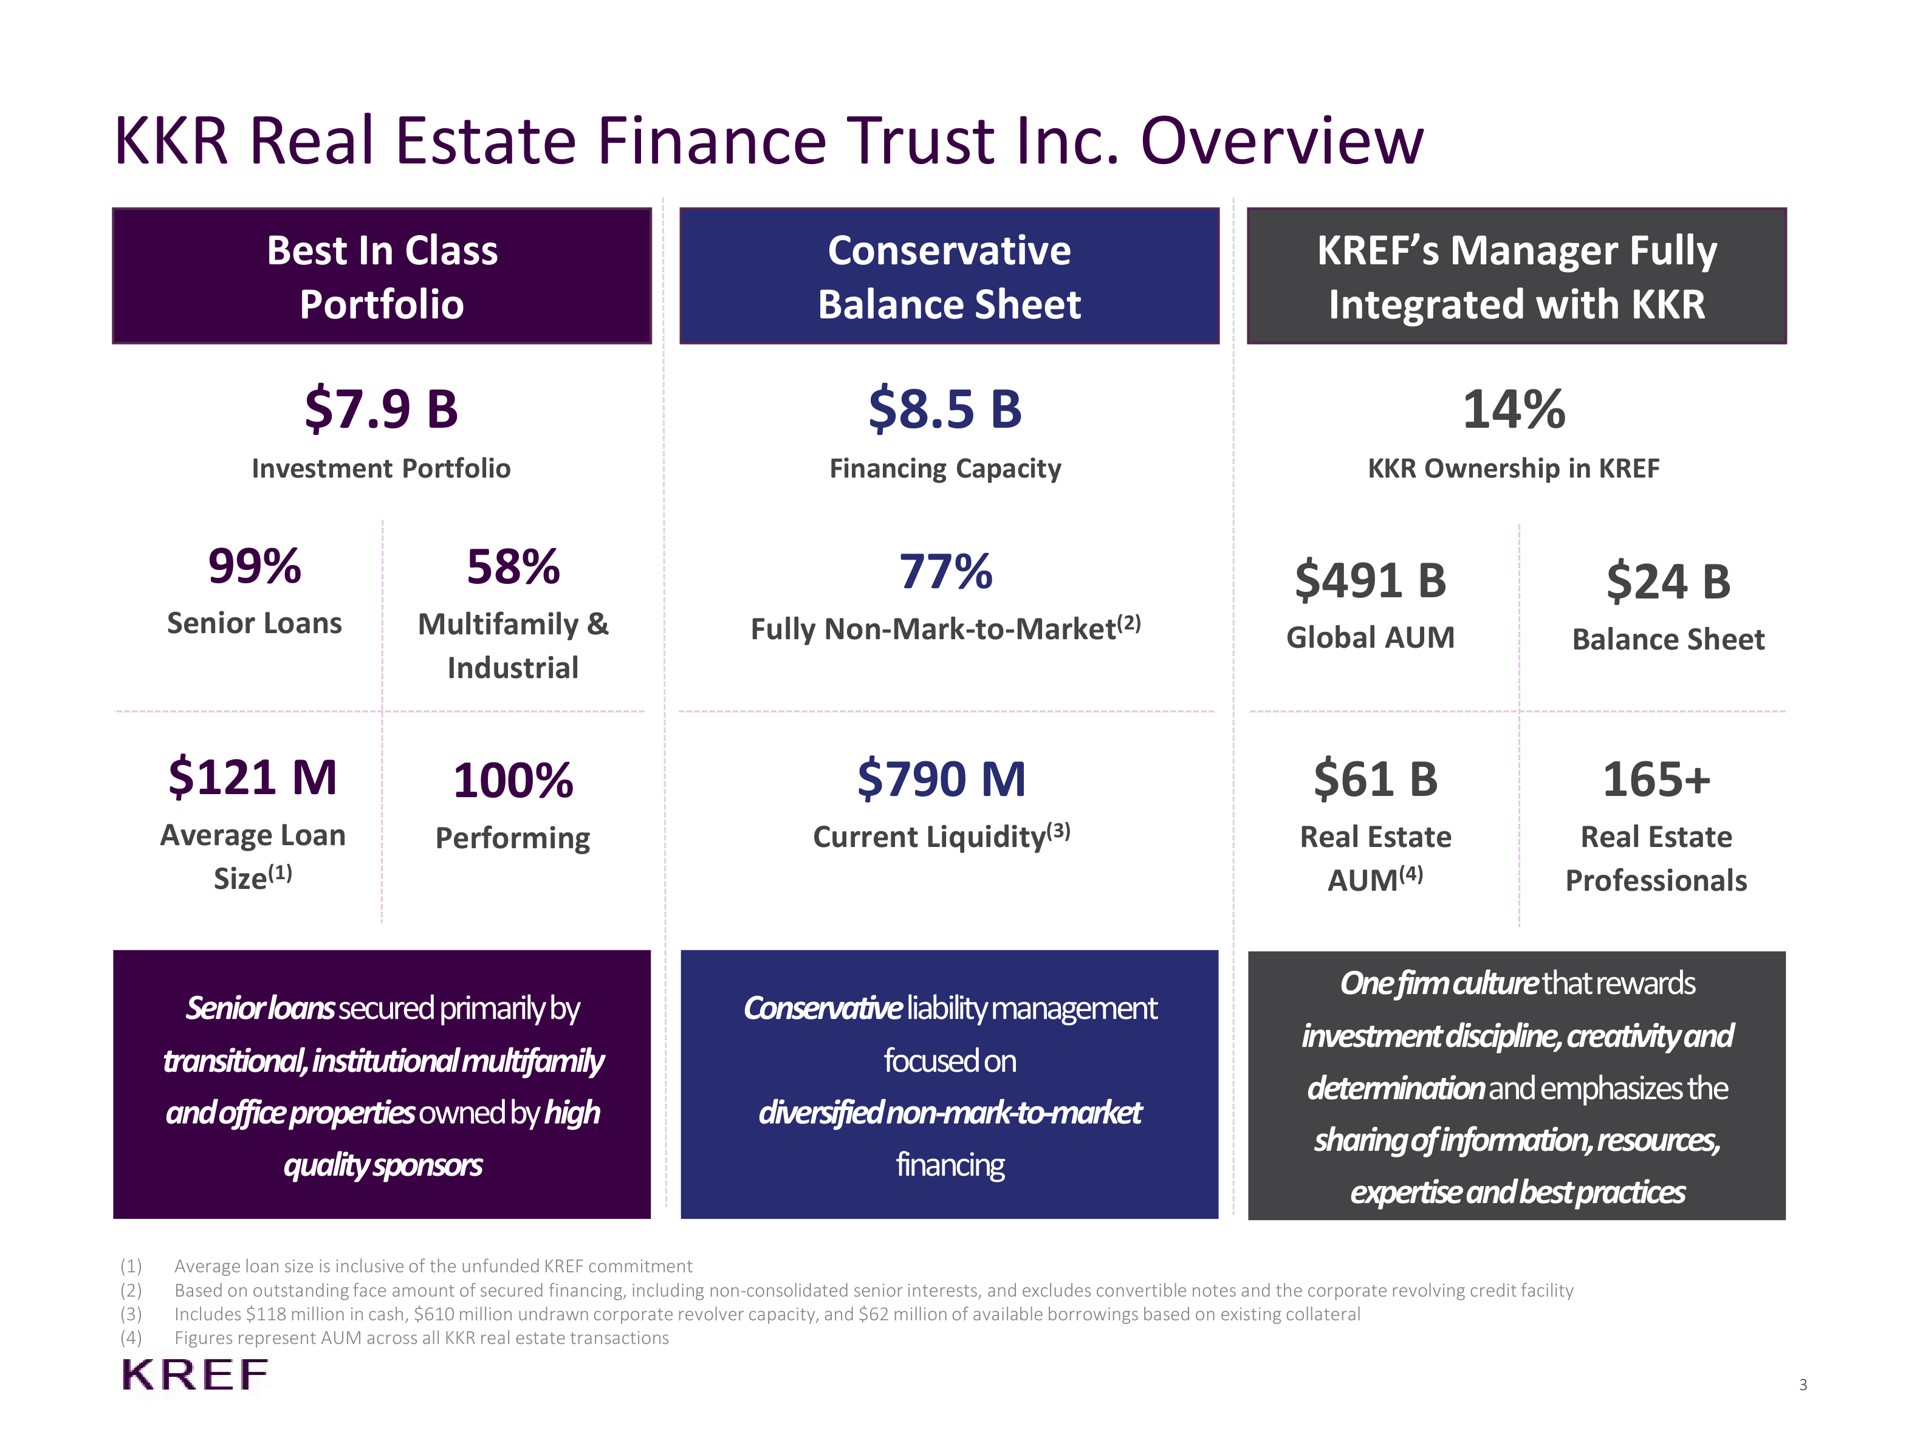 real estate finance trust overview best in class portfolio conservative balance sheet manager fully integrated with one firm rewards investment discipline creativity and determination and emphasizes the sharing of information resources and best practices senior loans secured primarily by transitional institutional and office properties owned by high quality sponsors management focused on diversified non mark to market financing mae | KKR Real Estate Finance Trust